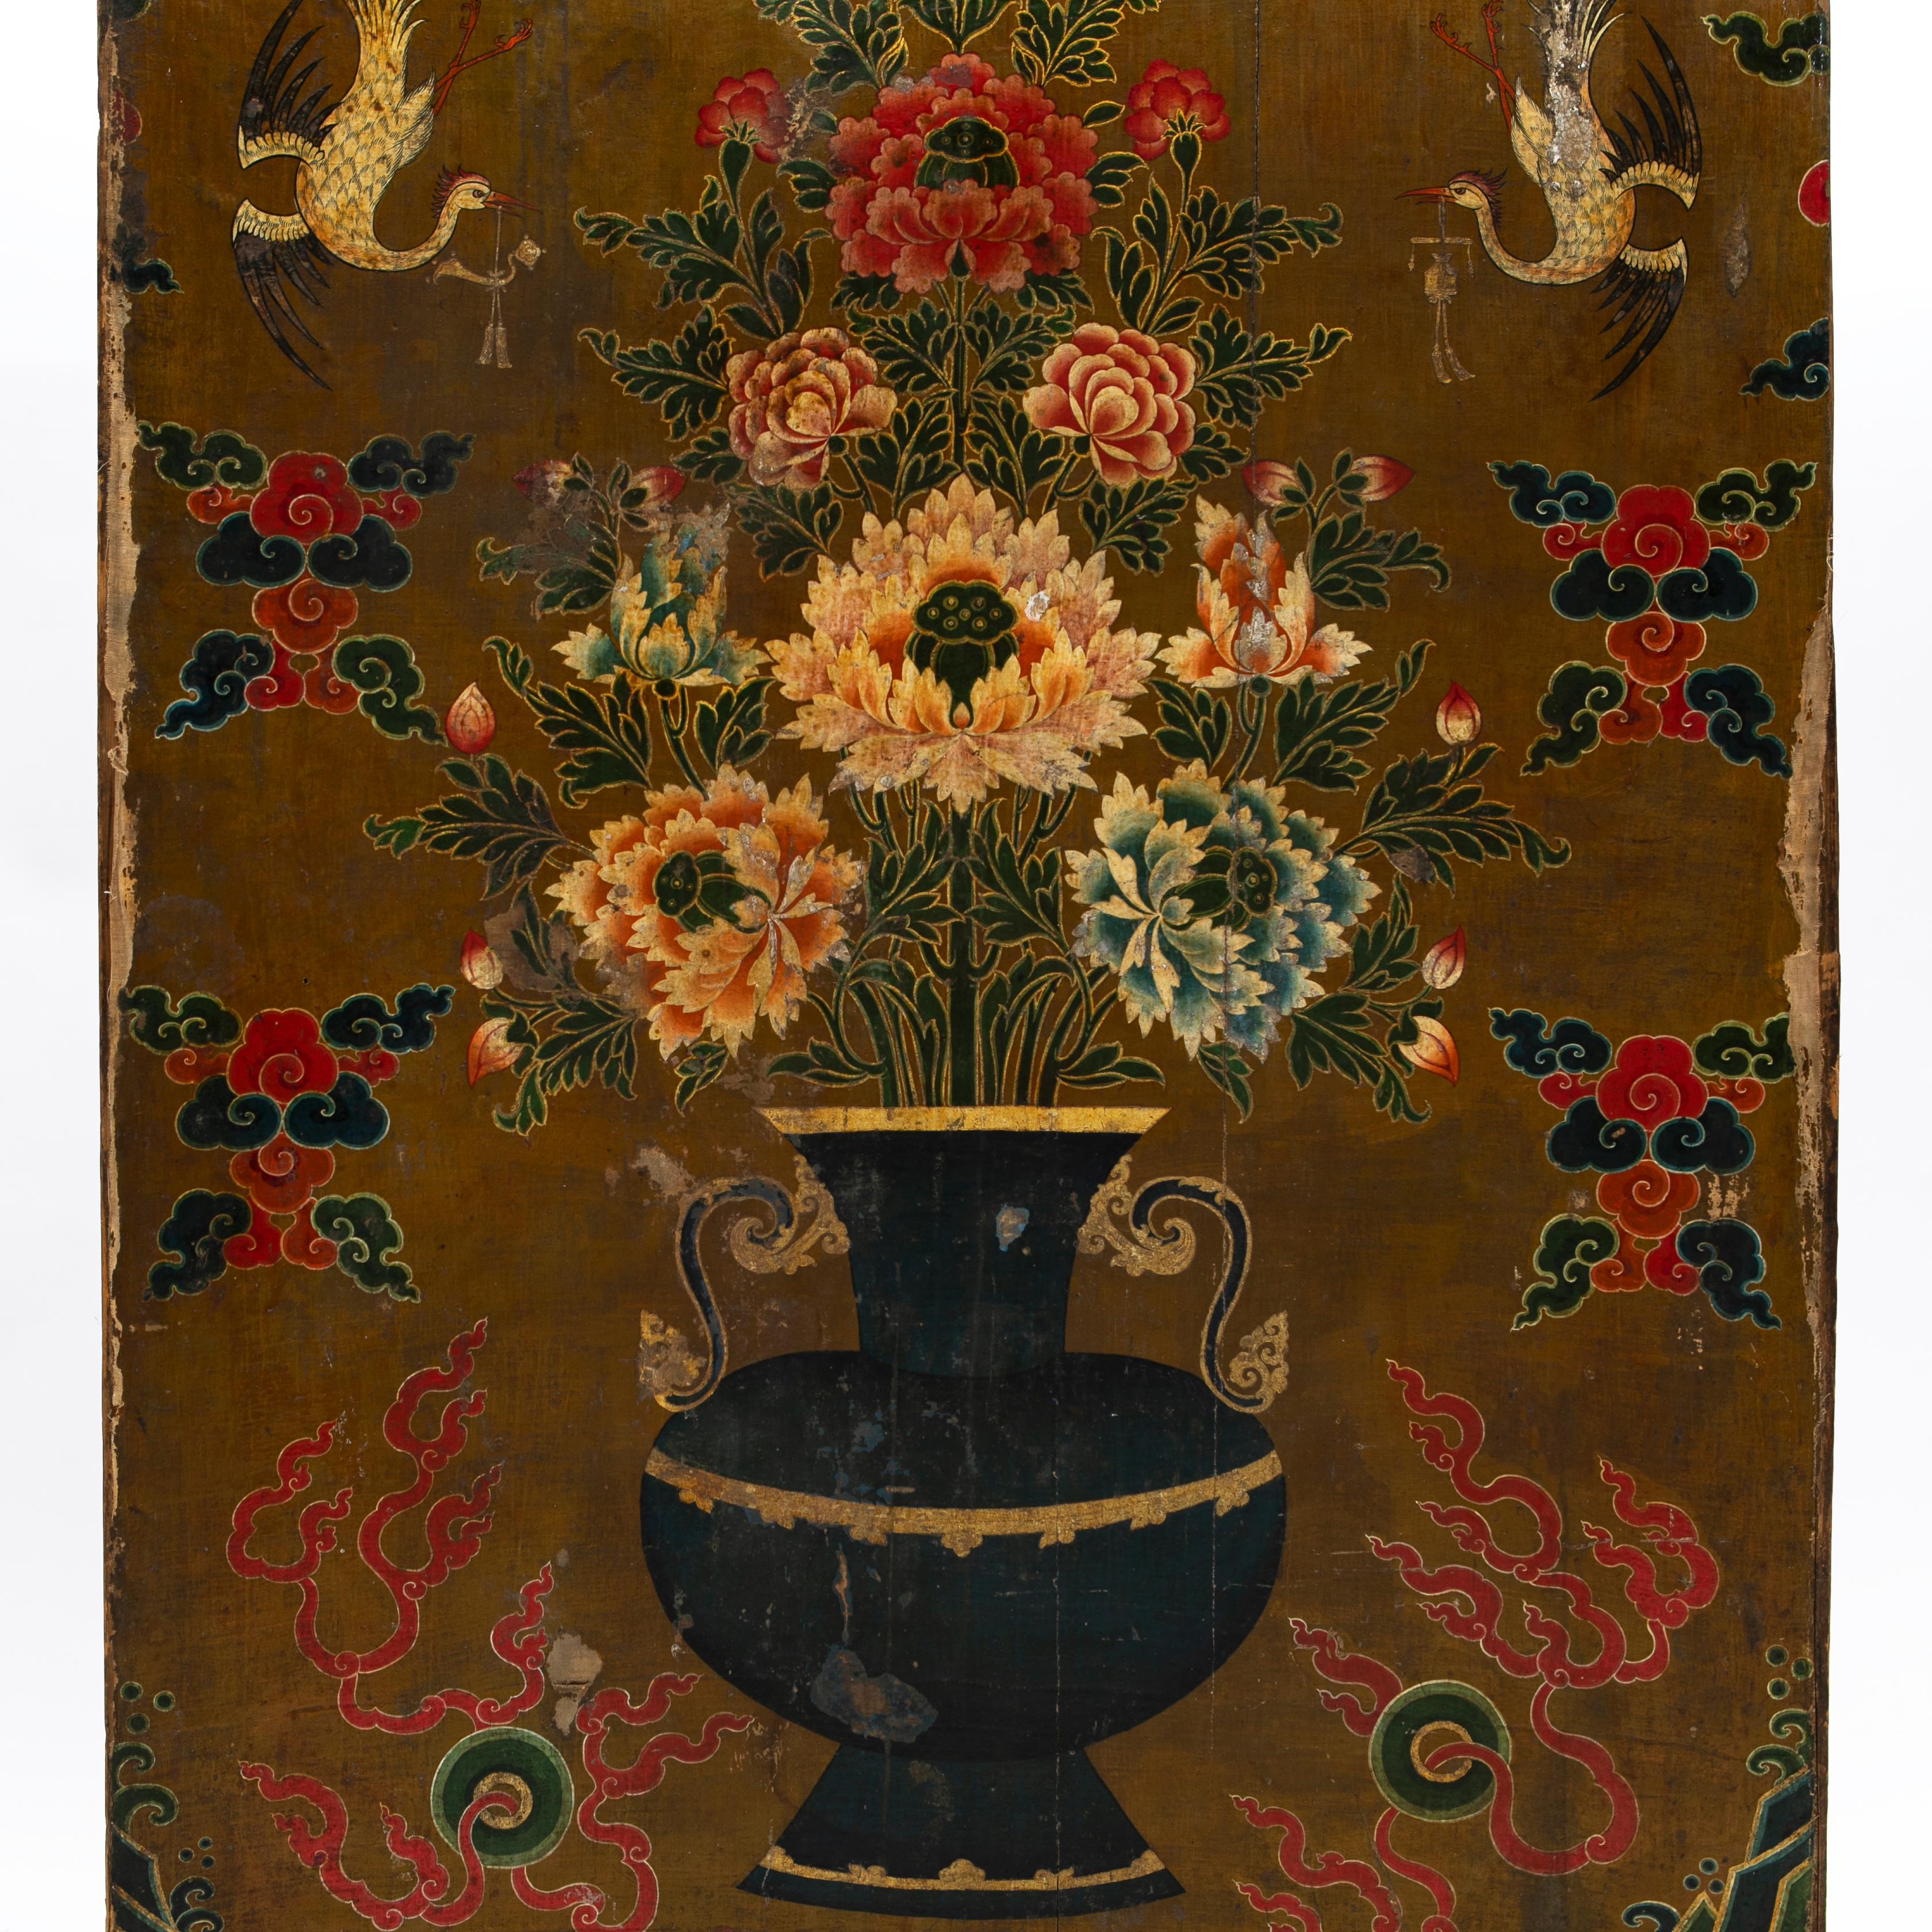 Large Ming dynasty period painting, China 1365-1644.
Oil or tempera painted on thin canvas (or silk), mounted on wood. The painting displays a vase of flowers in the middle, a phoenix bird in each corner and waves at the bottom.

Very decoratively